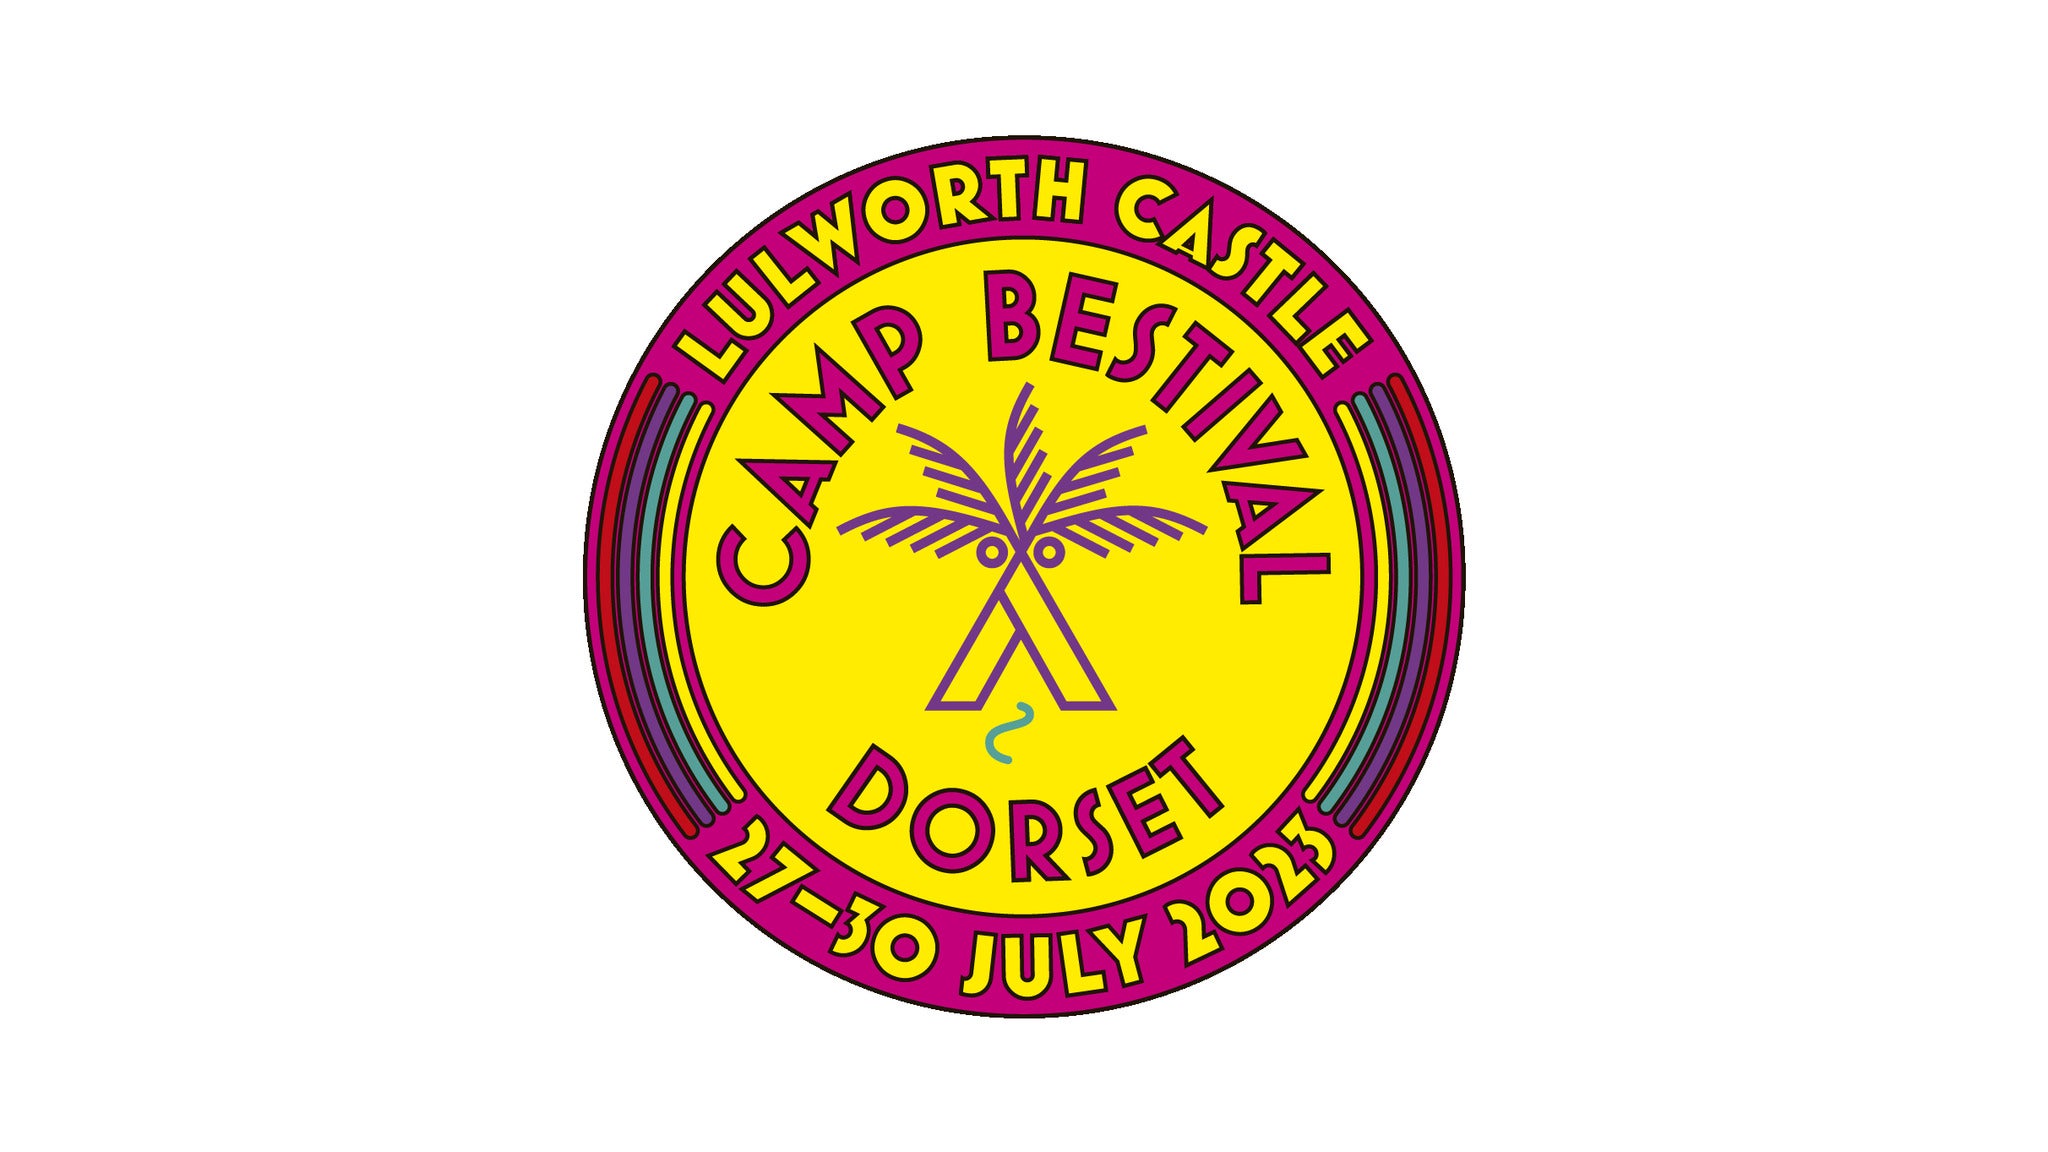 Image used with permission from Ticketmaster | Camp Bestival Dorset Boutique - Tipi Tent for 3 tickets